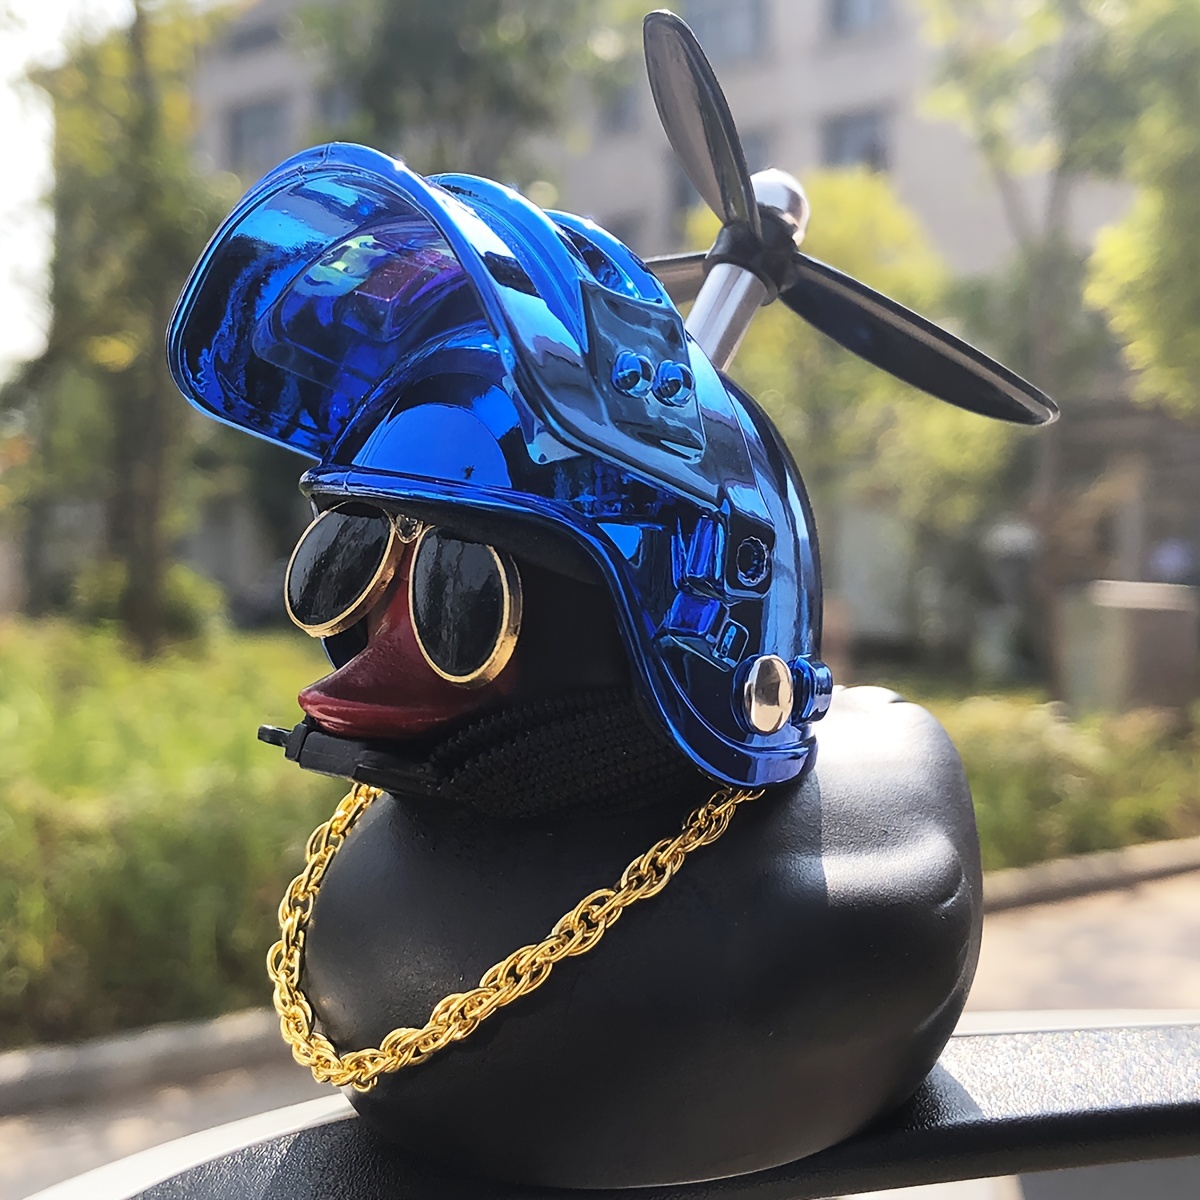 

Cool Duck Dashboard Ornament With Propeller Helmet And Sunglasses, Pvc Material, Car Interior Decoration Accessory, Ideal Gift For Men And Duck Lovers